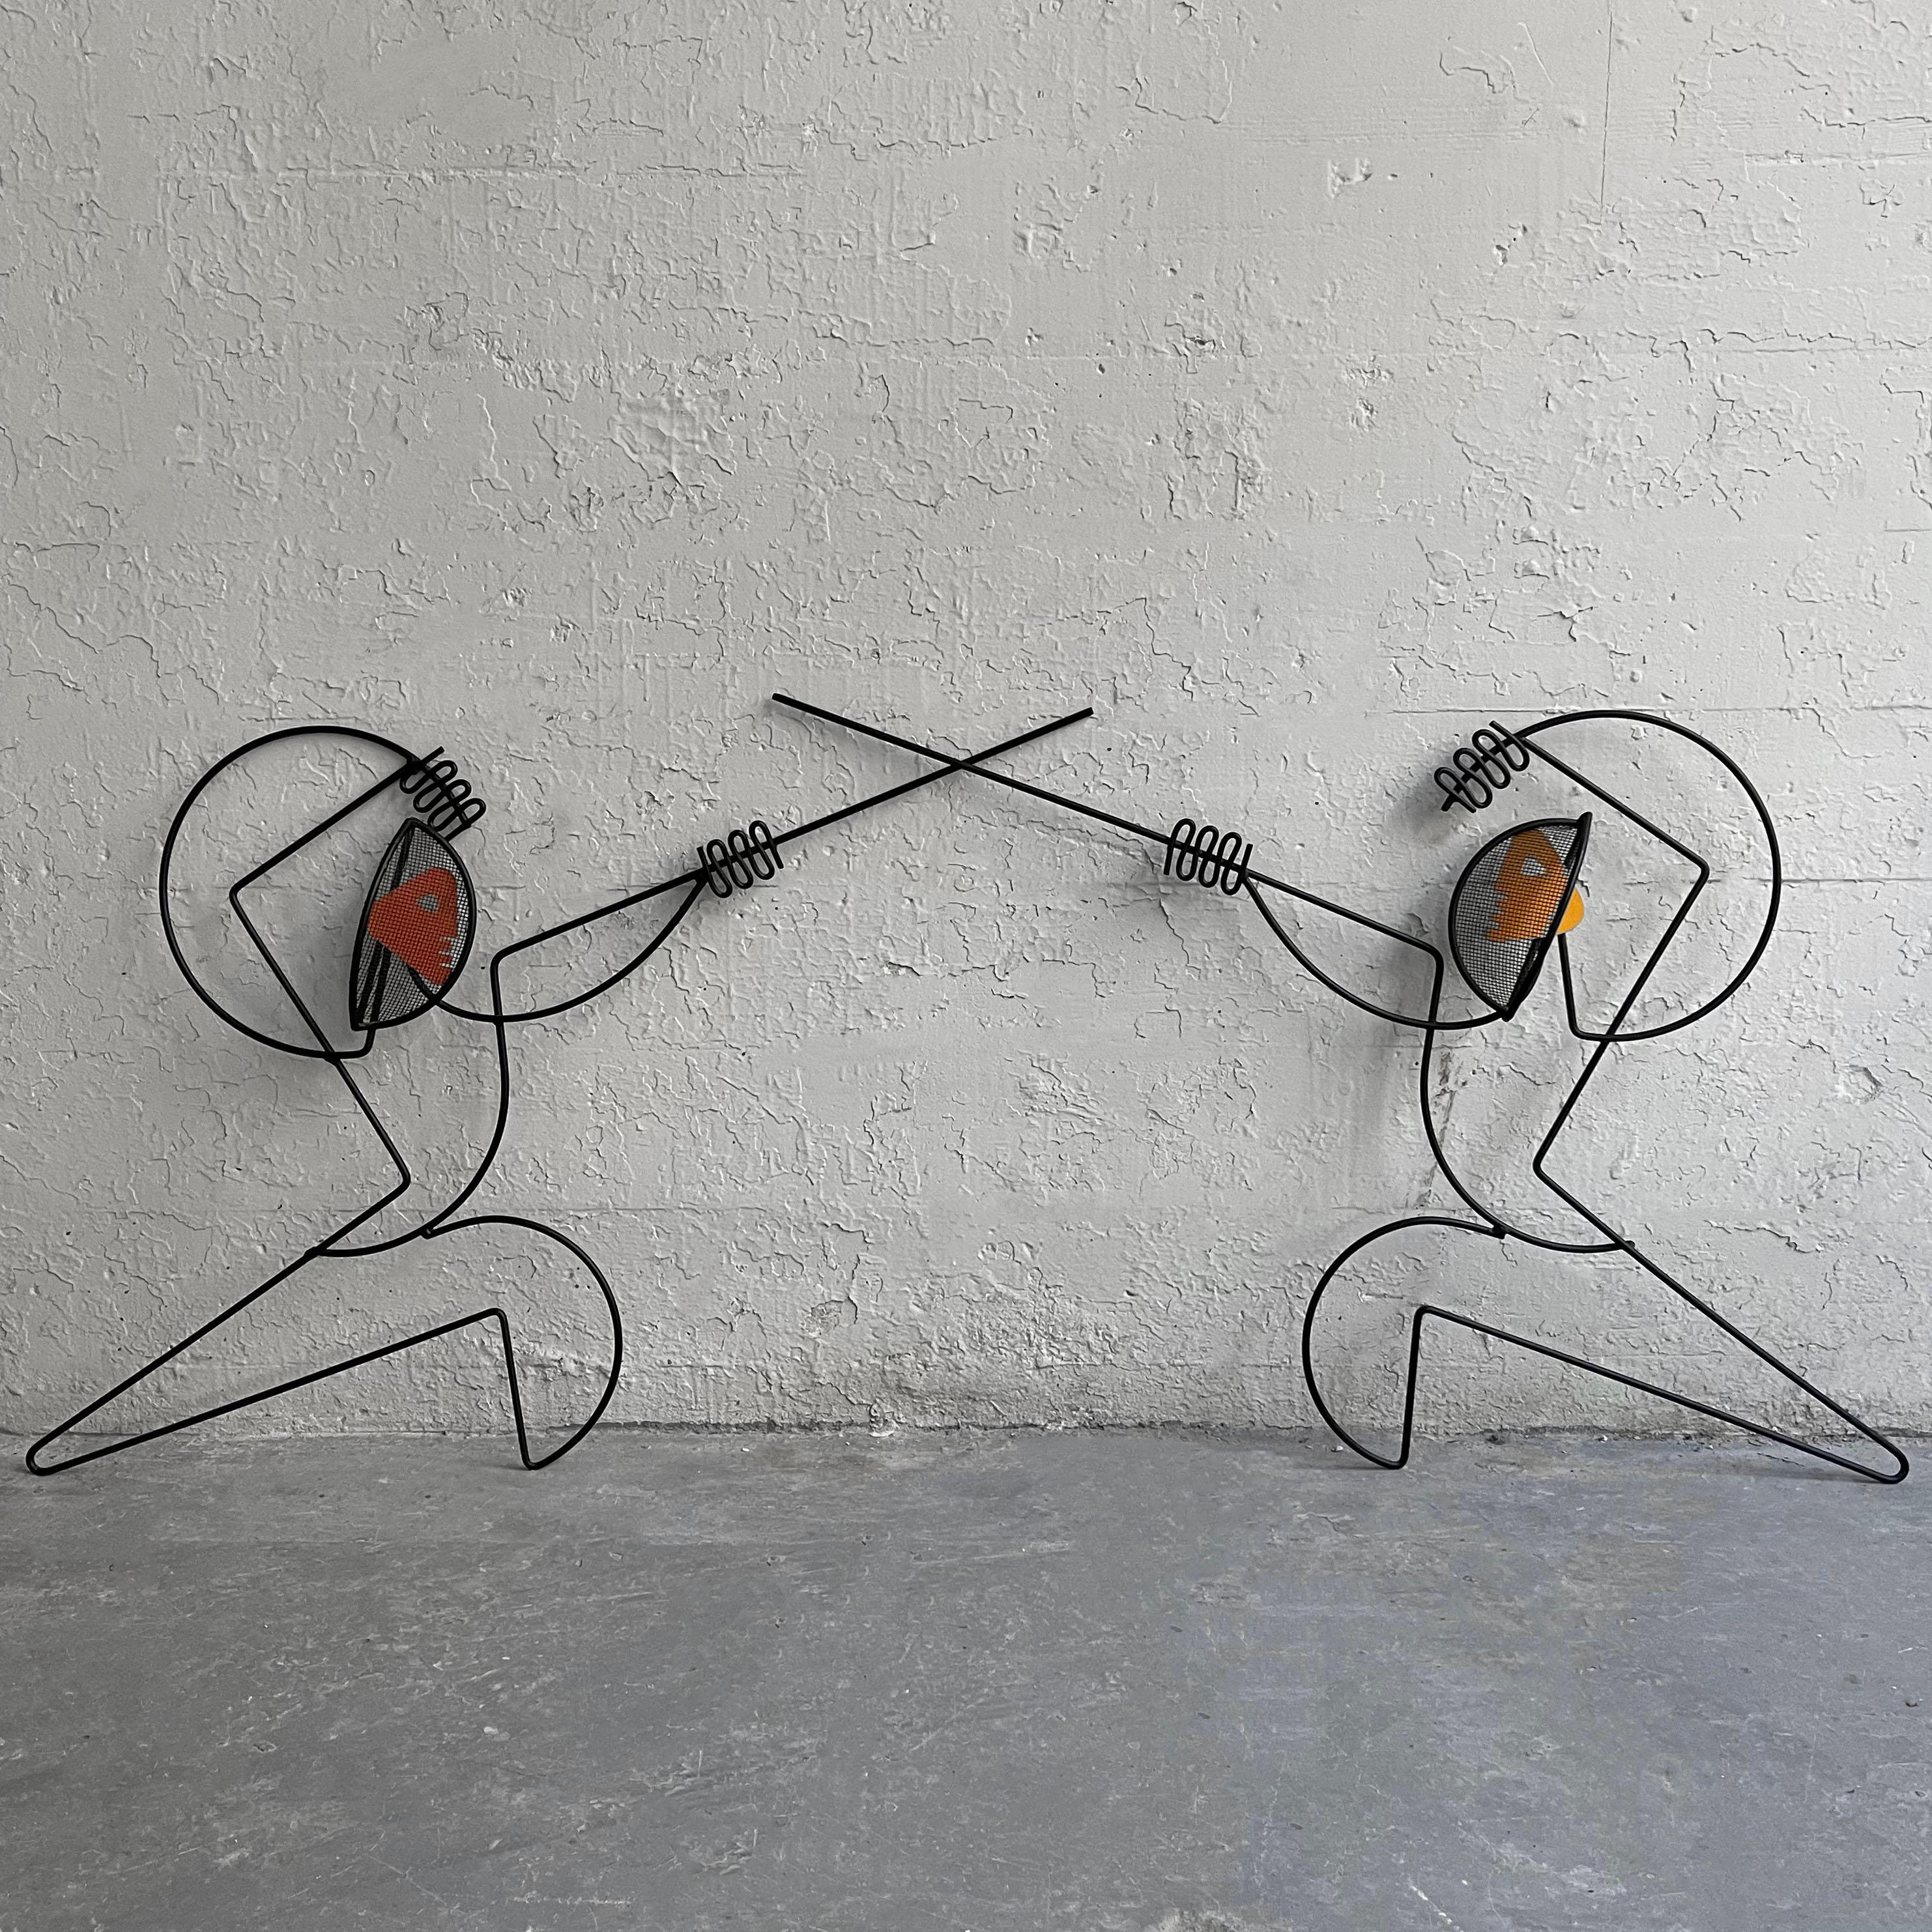 Pair of Mid-Century Modern, wrought iron, wall sculptures by Frederick Weinberg depicting fencers in engarde stance.